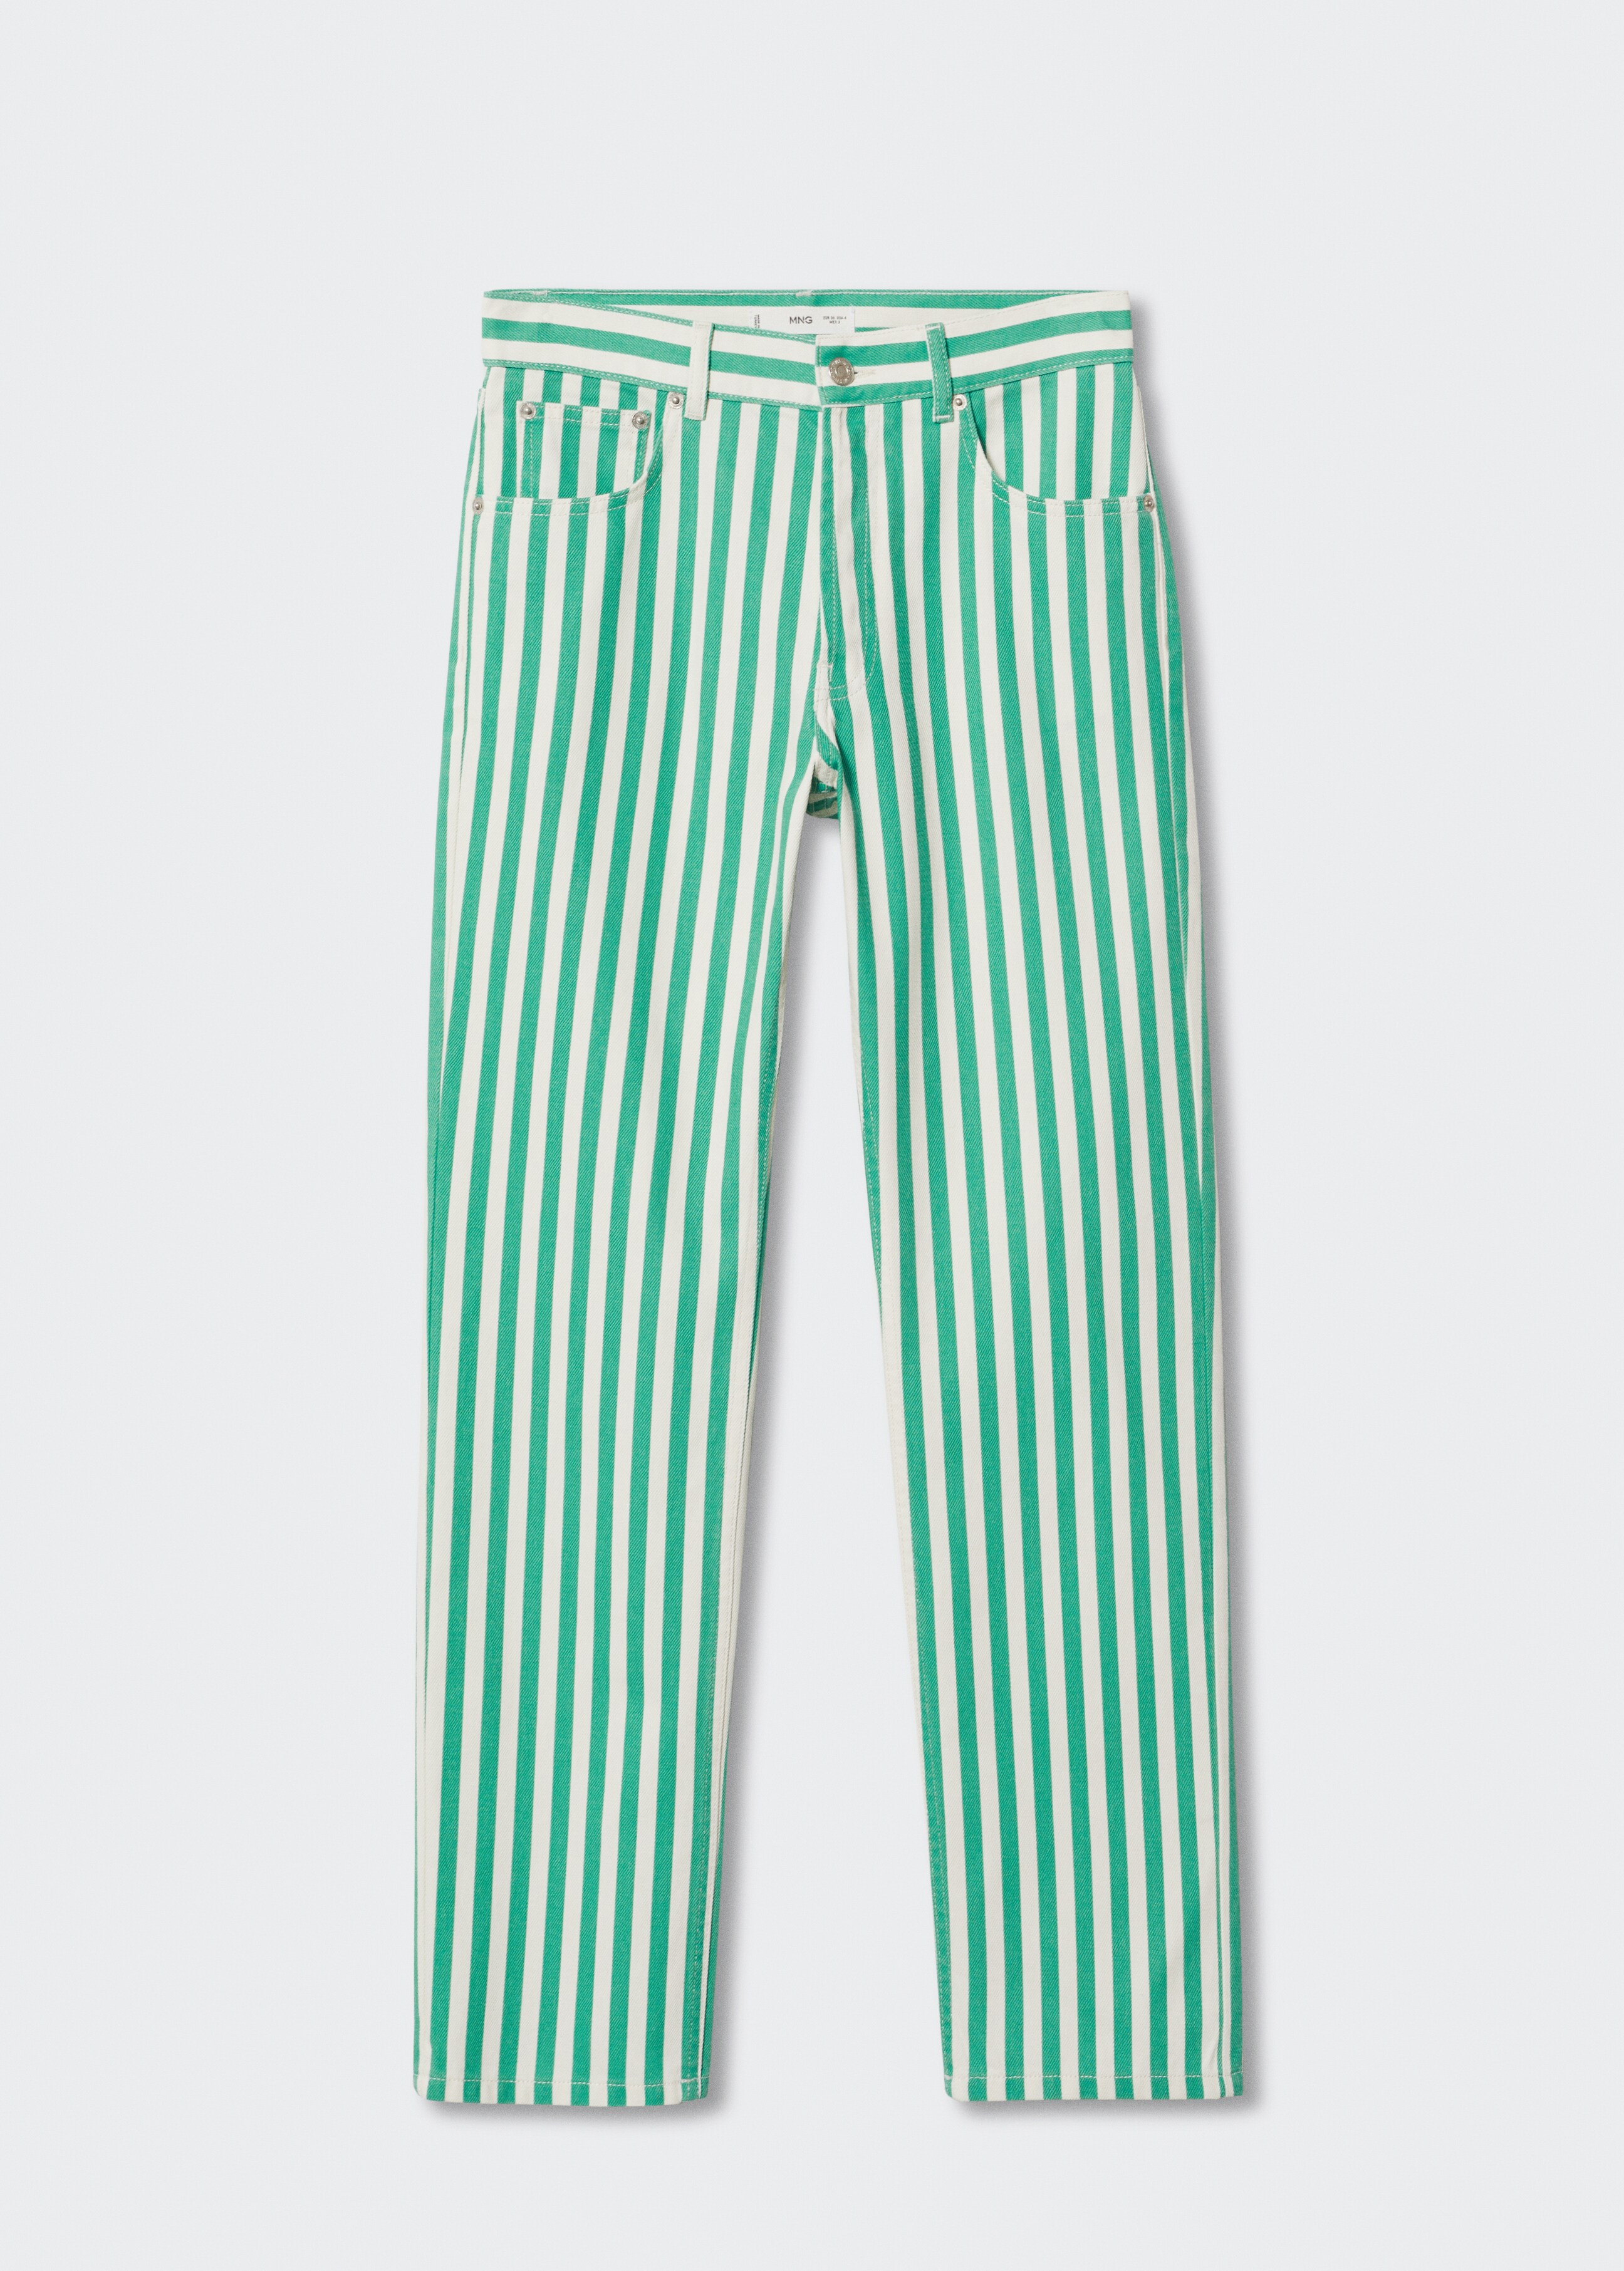 Straight striped jeans - Article without model